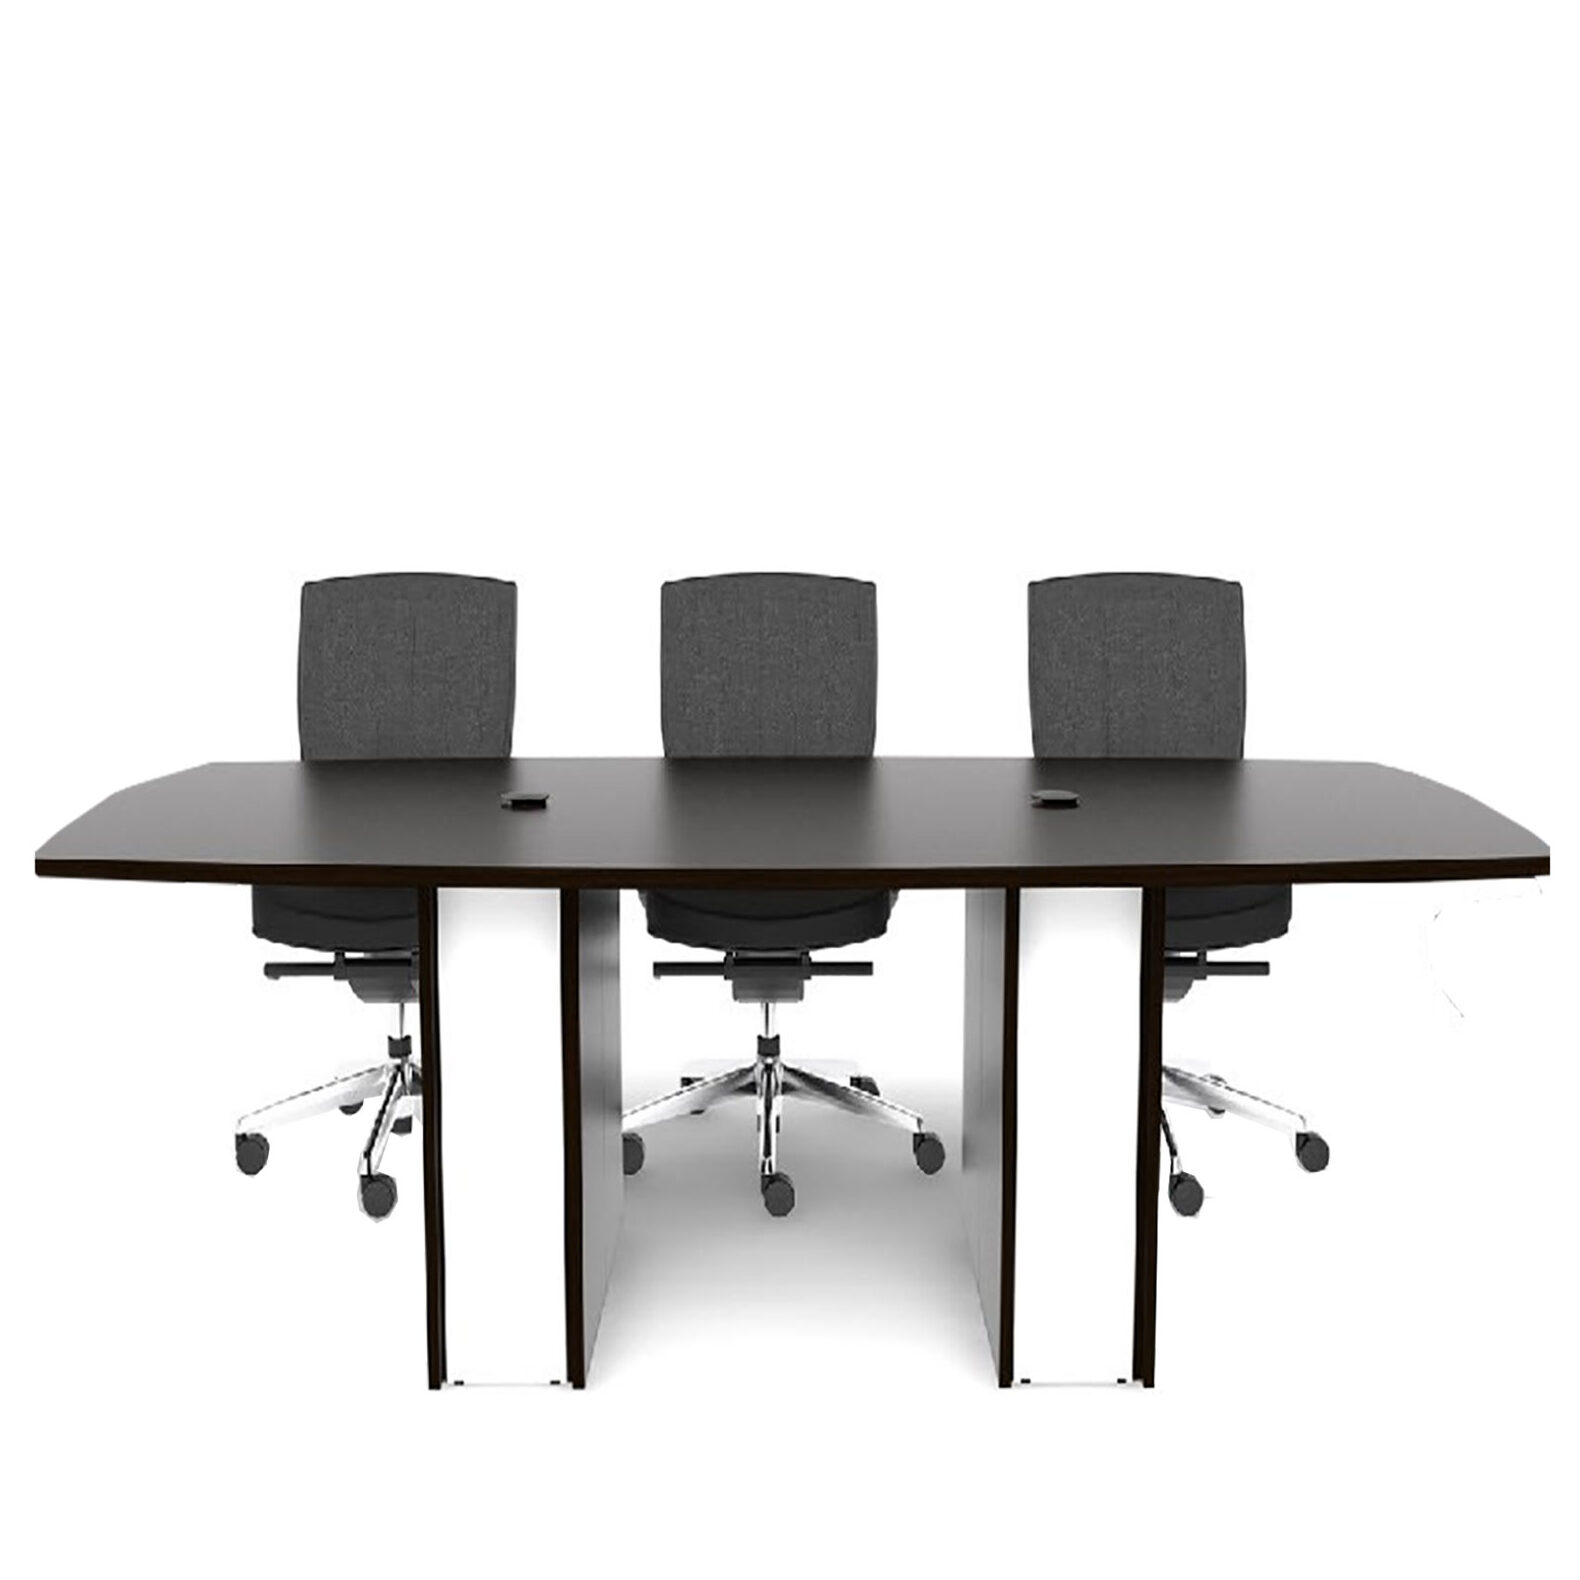 Cherryman Verde Conference Table For those offices on a Budget